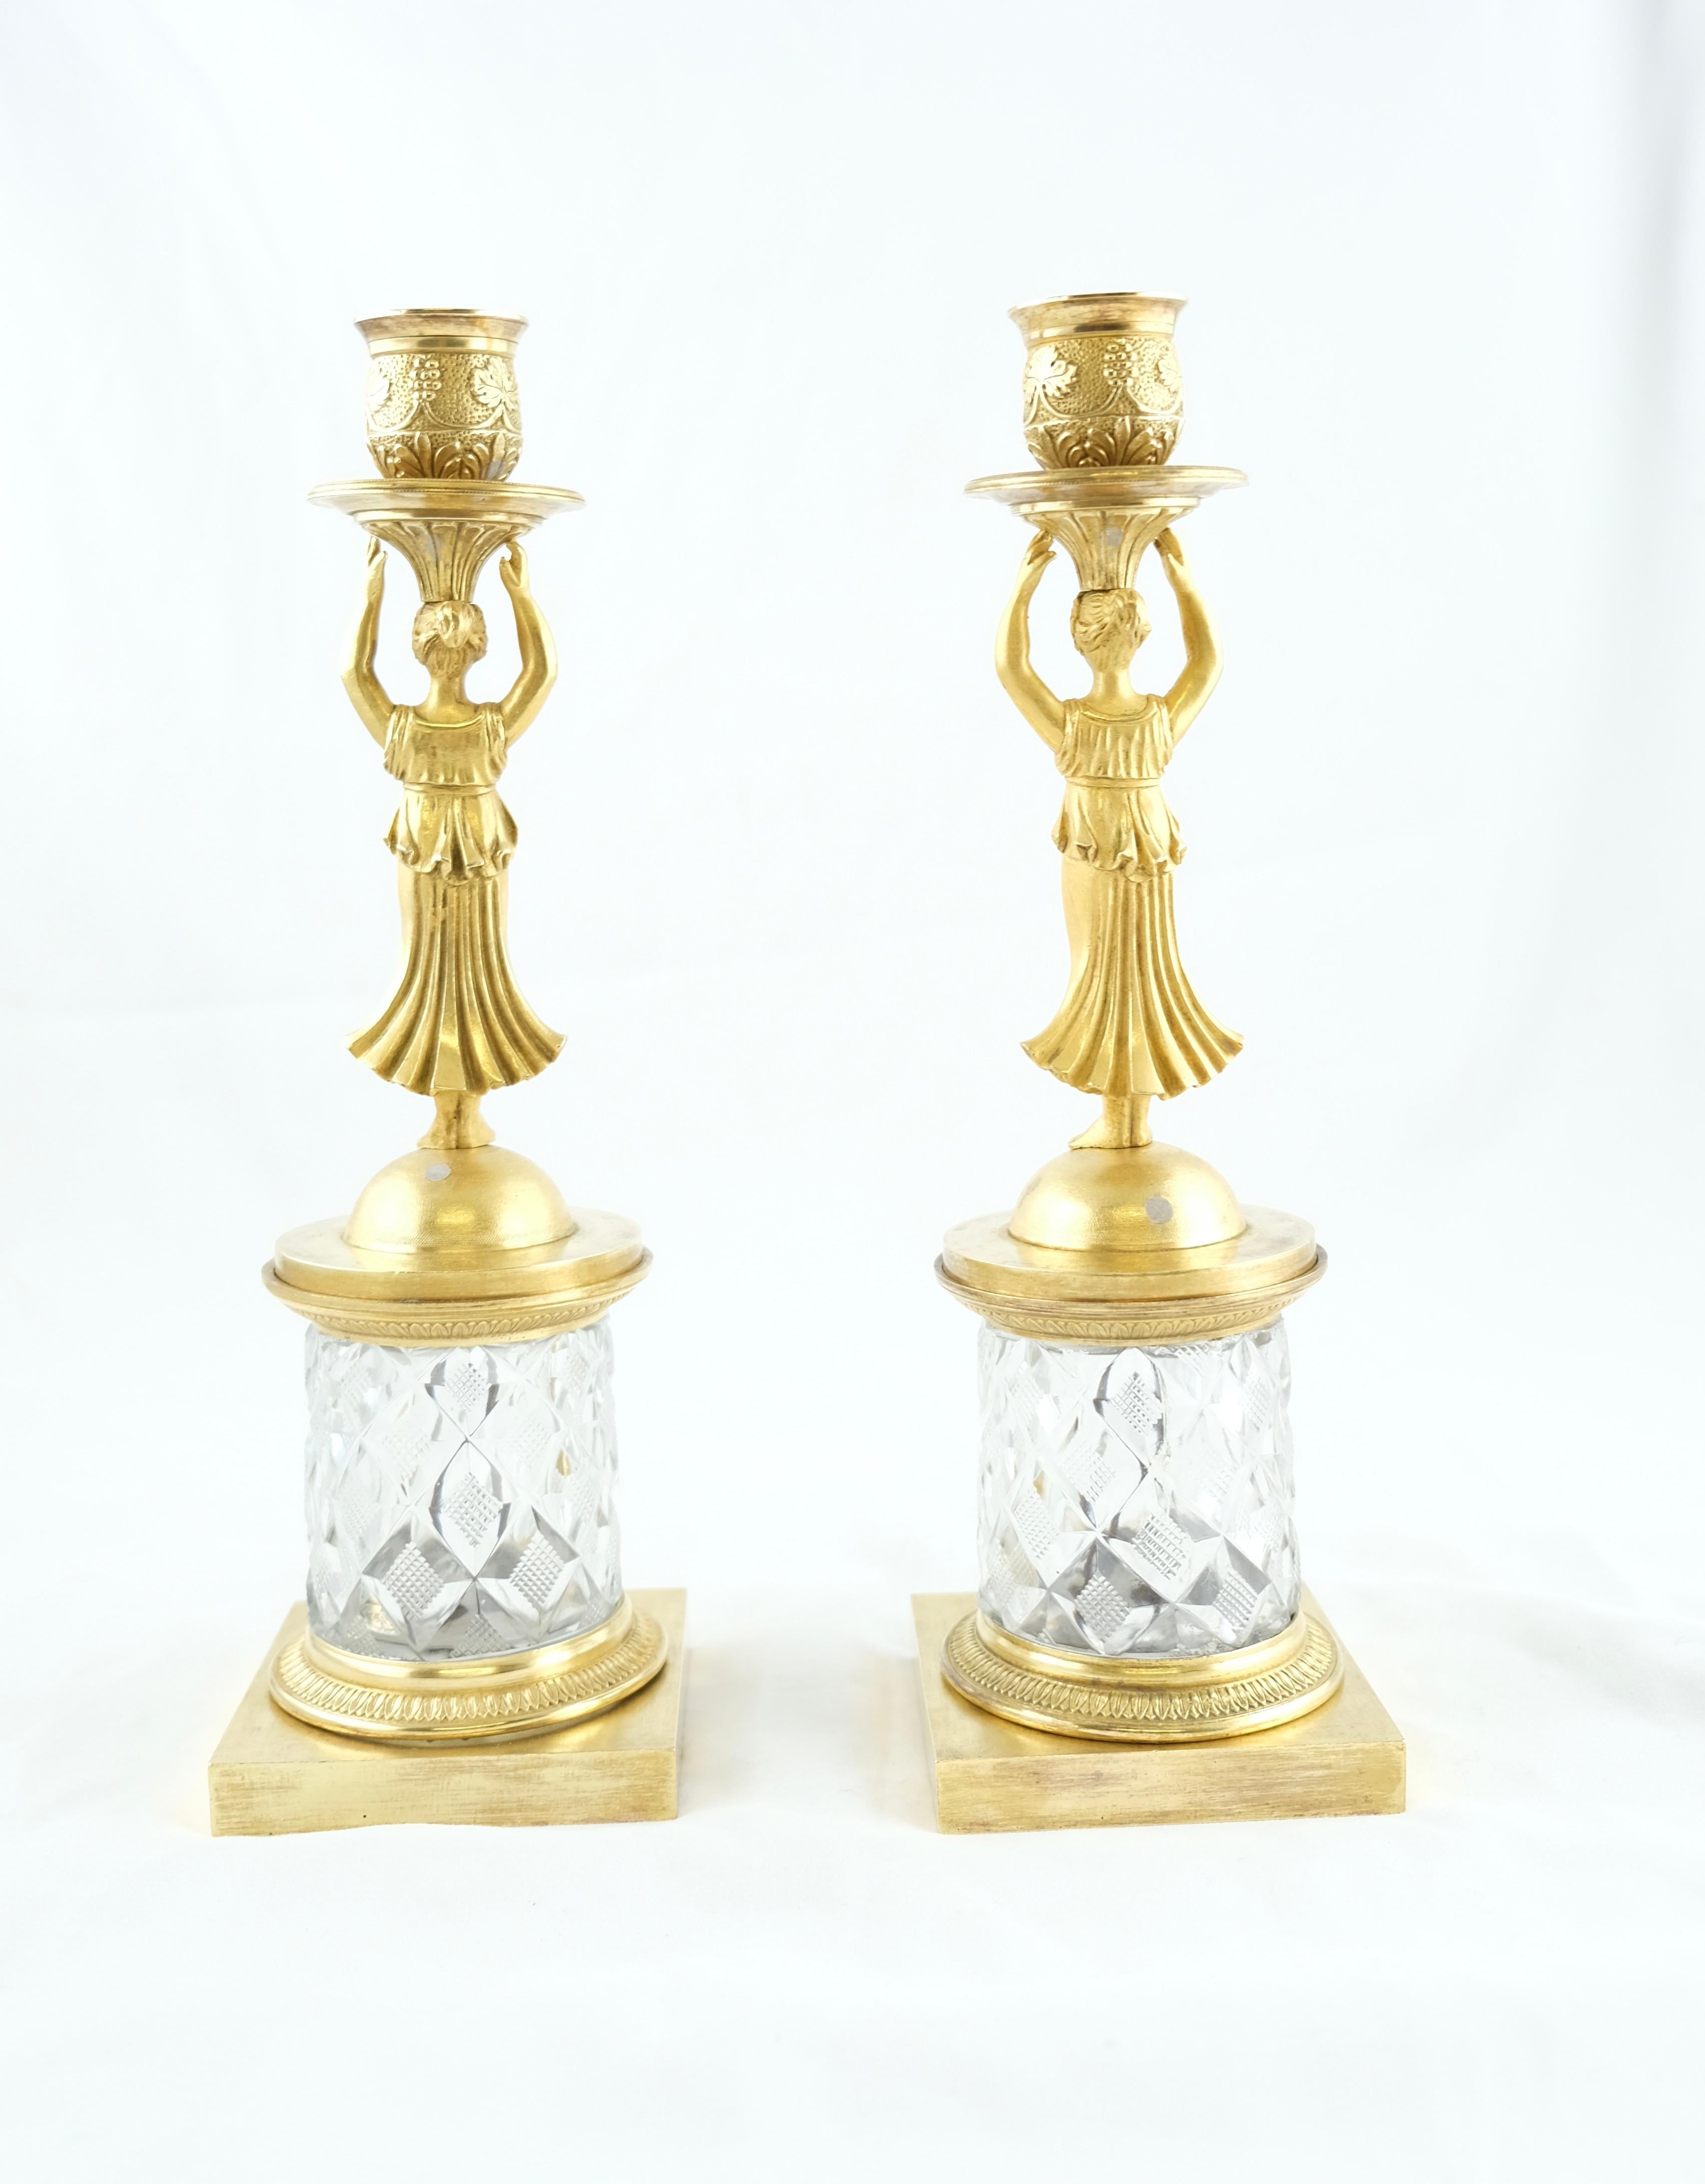 Pair of Empire Gilt Bronze and Cut Crystal Candlesticks, Ca 1810 For Sale 2